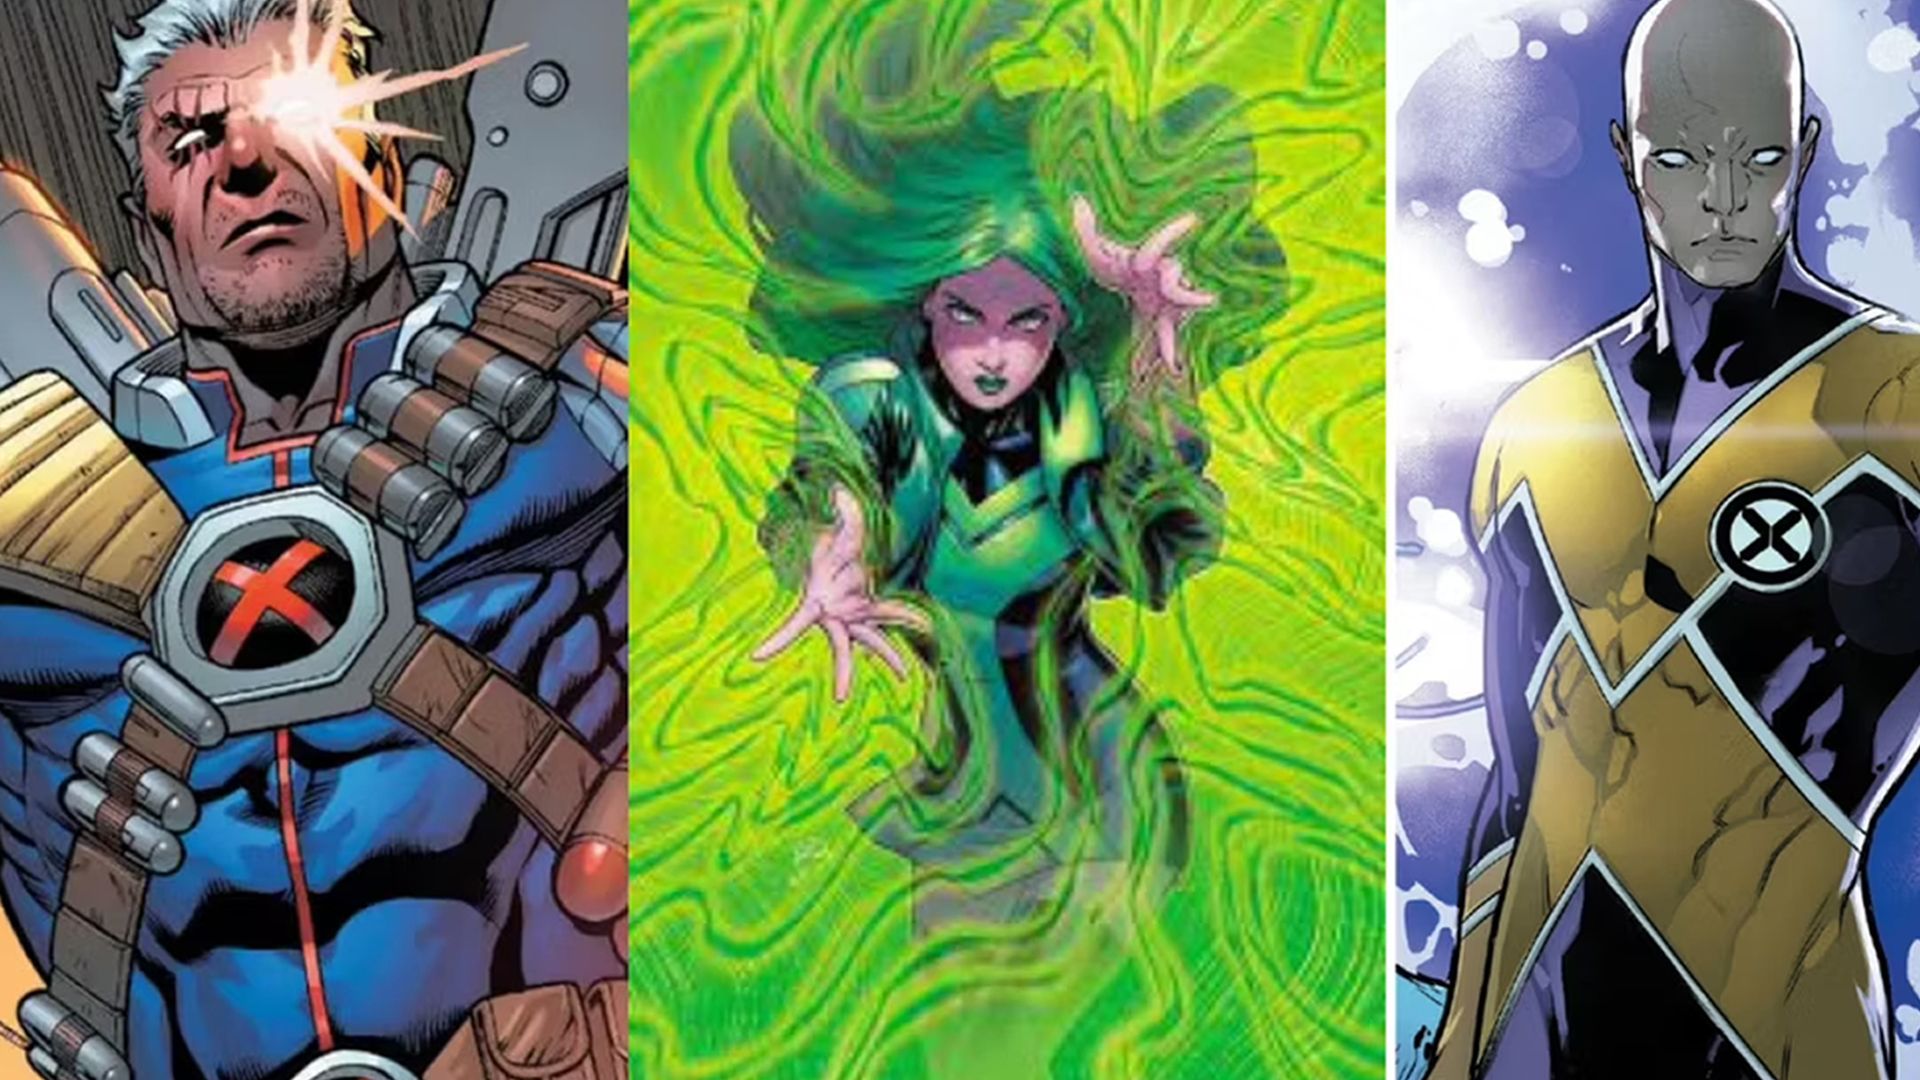 A split image of Cable, Polaris, and Synch from the X-Men Comics